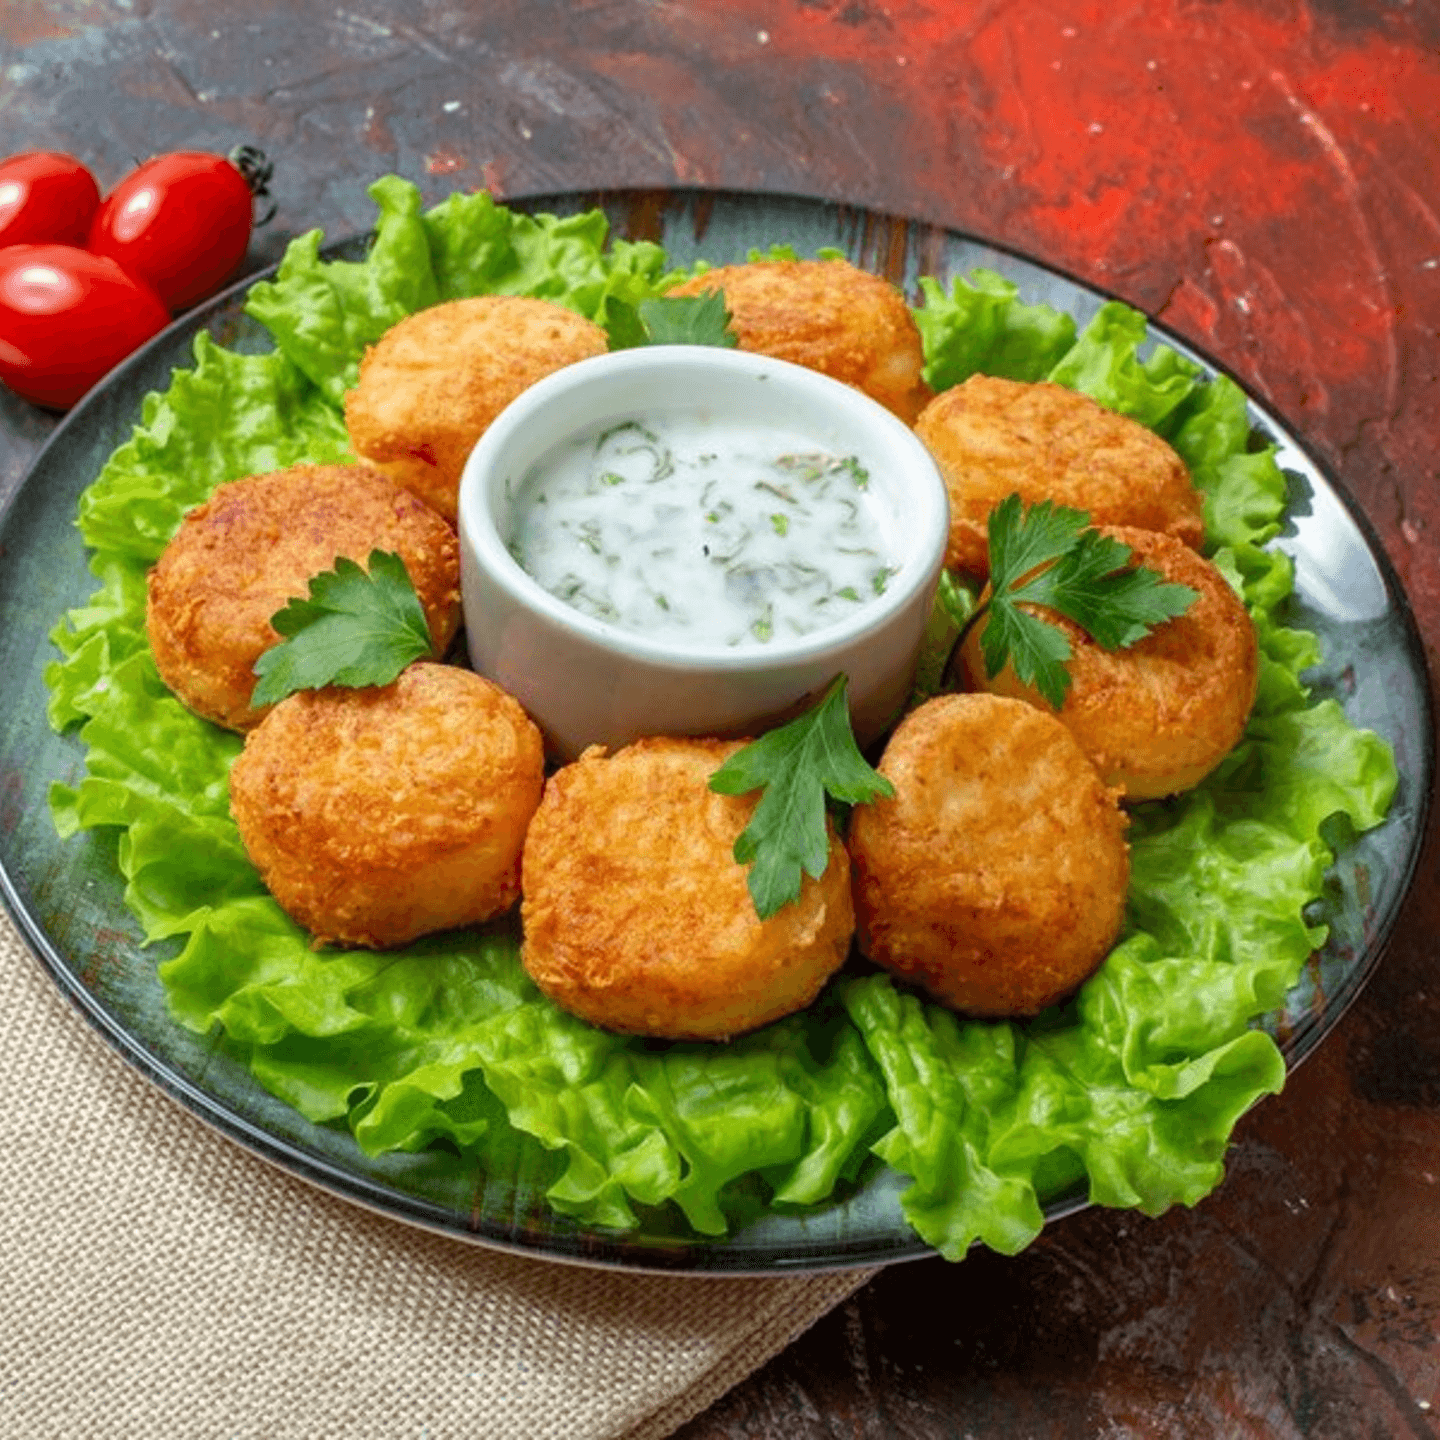 Savor the Heat with Our Jalapeño Cheese Bites